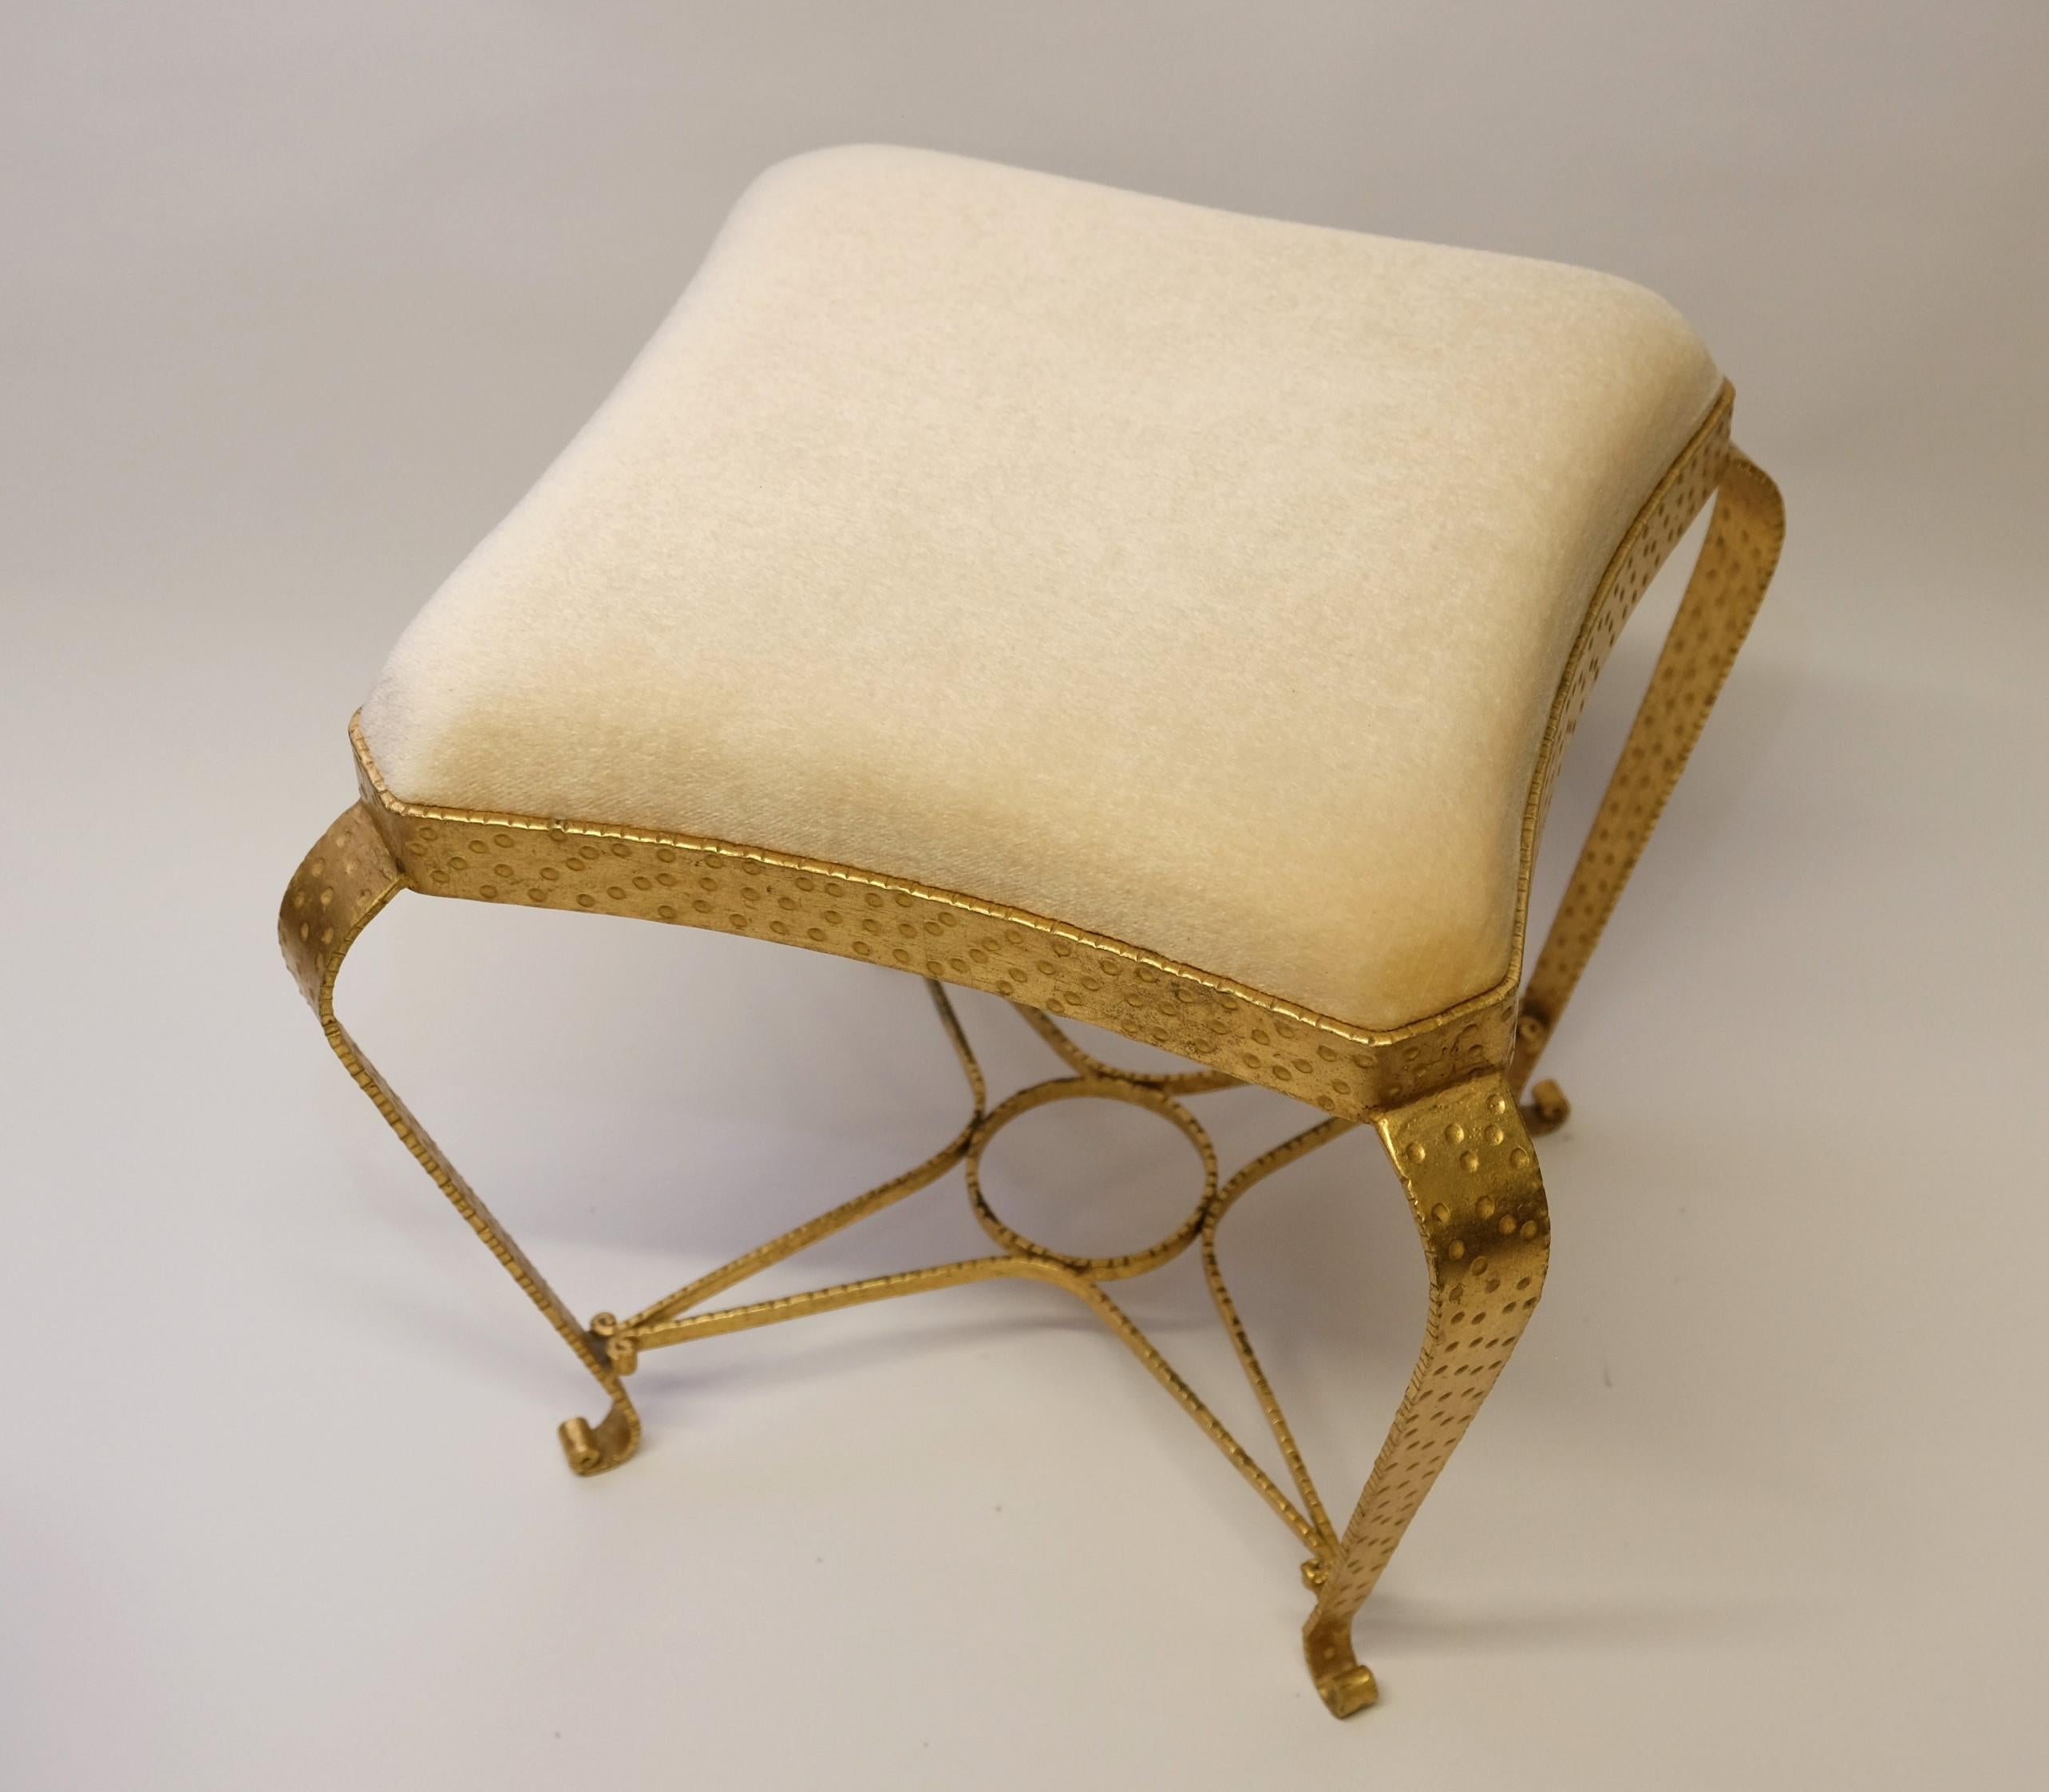 Stool in Gilt Metal by Pier Luigi Colli, Italy 1950s For Sale 2